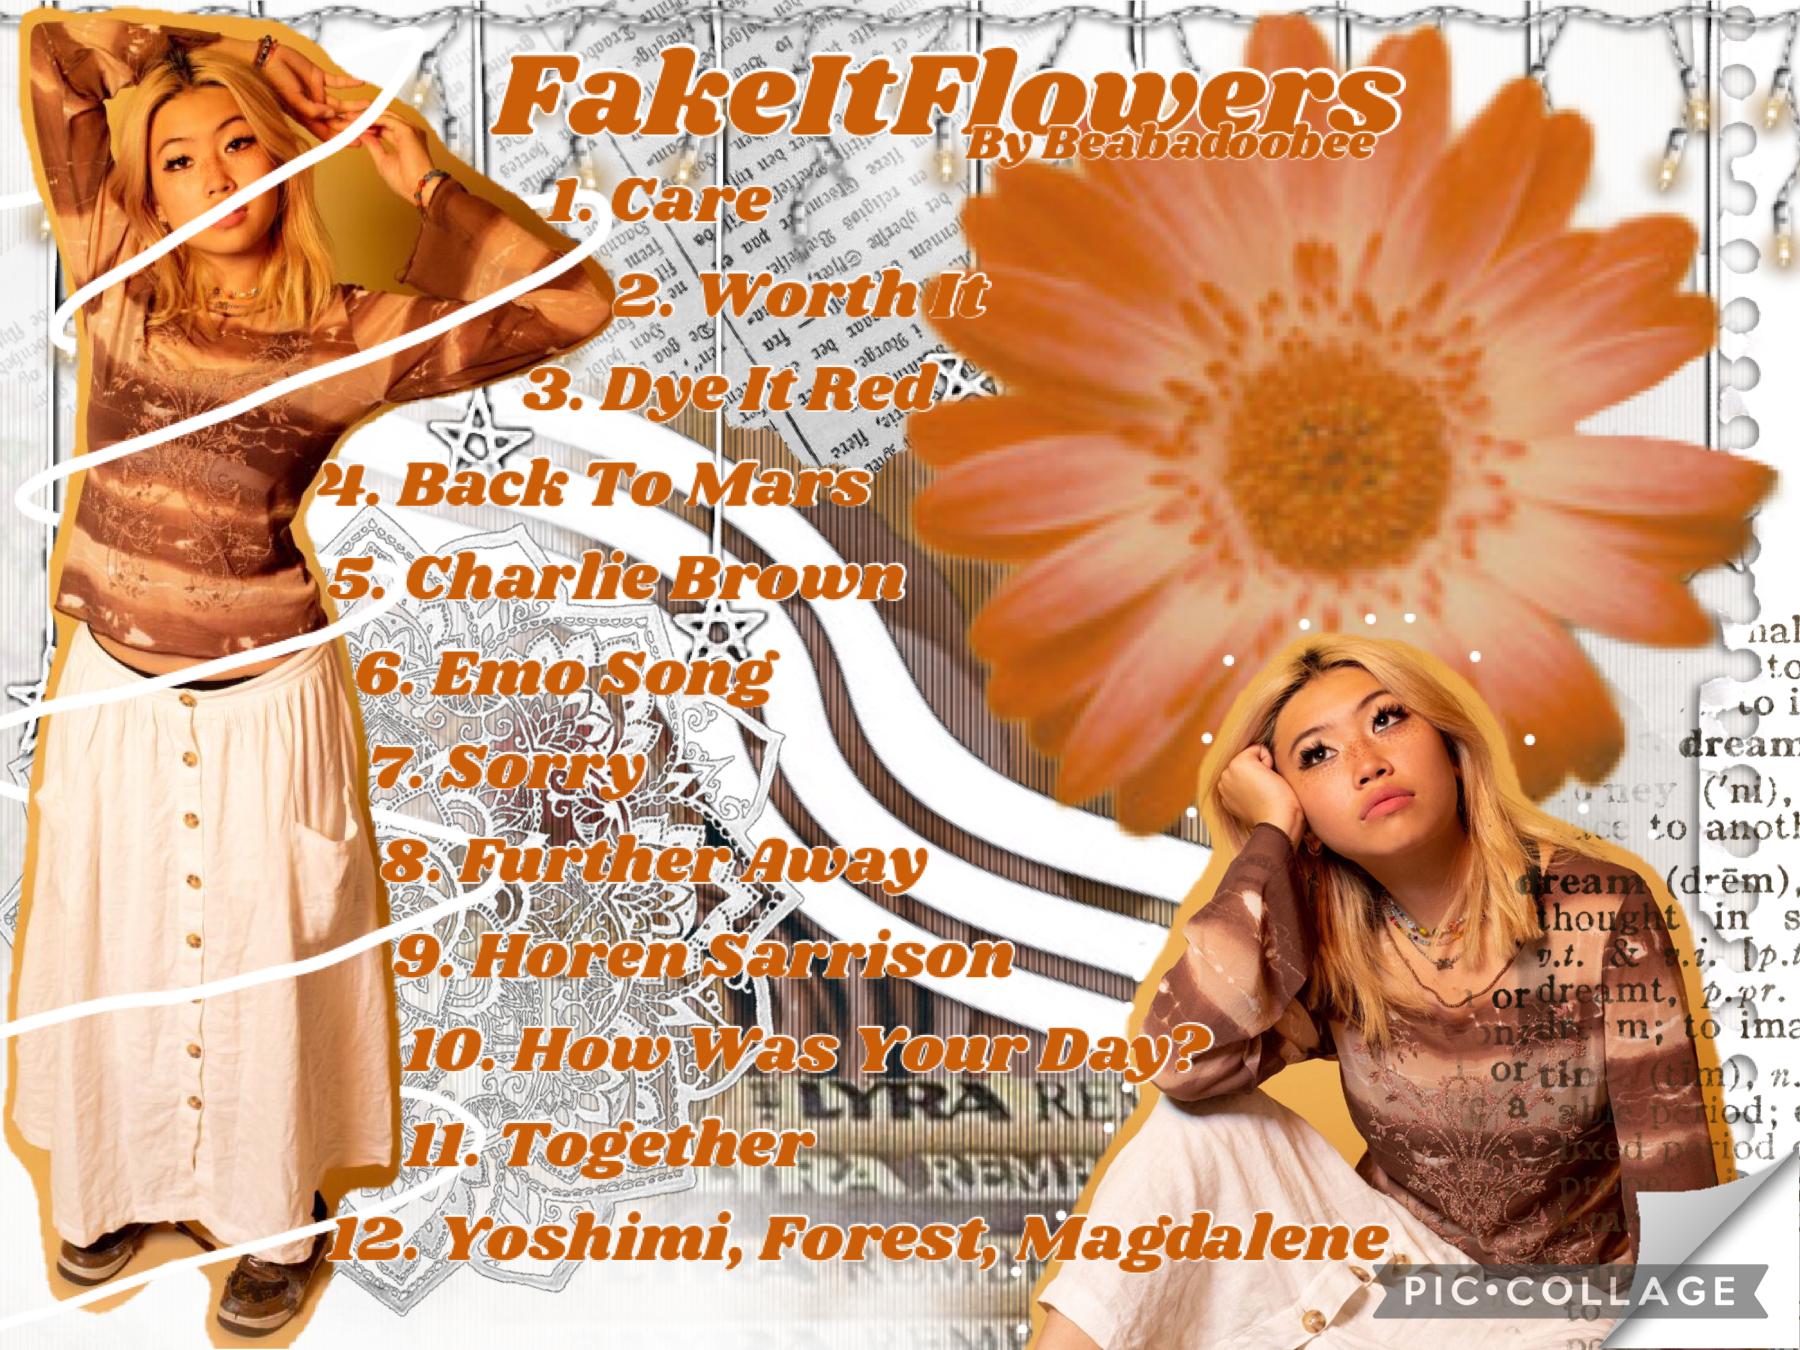 🧡 TAPPITY TAP TAP 🧡
🧡 Beabadoobee ‘Fake It Flowers’ collage! 🧡
🧡 i git wireless earphones AND OMG THEY ARE SO COOL!! 🧡
🧡 QOTD- fav Beabadoobee song? 🧡
🧡 AOTD- ‘coffee’ 🧡
🧡 ilysm 🧡